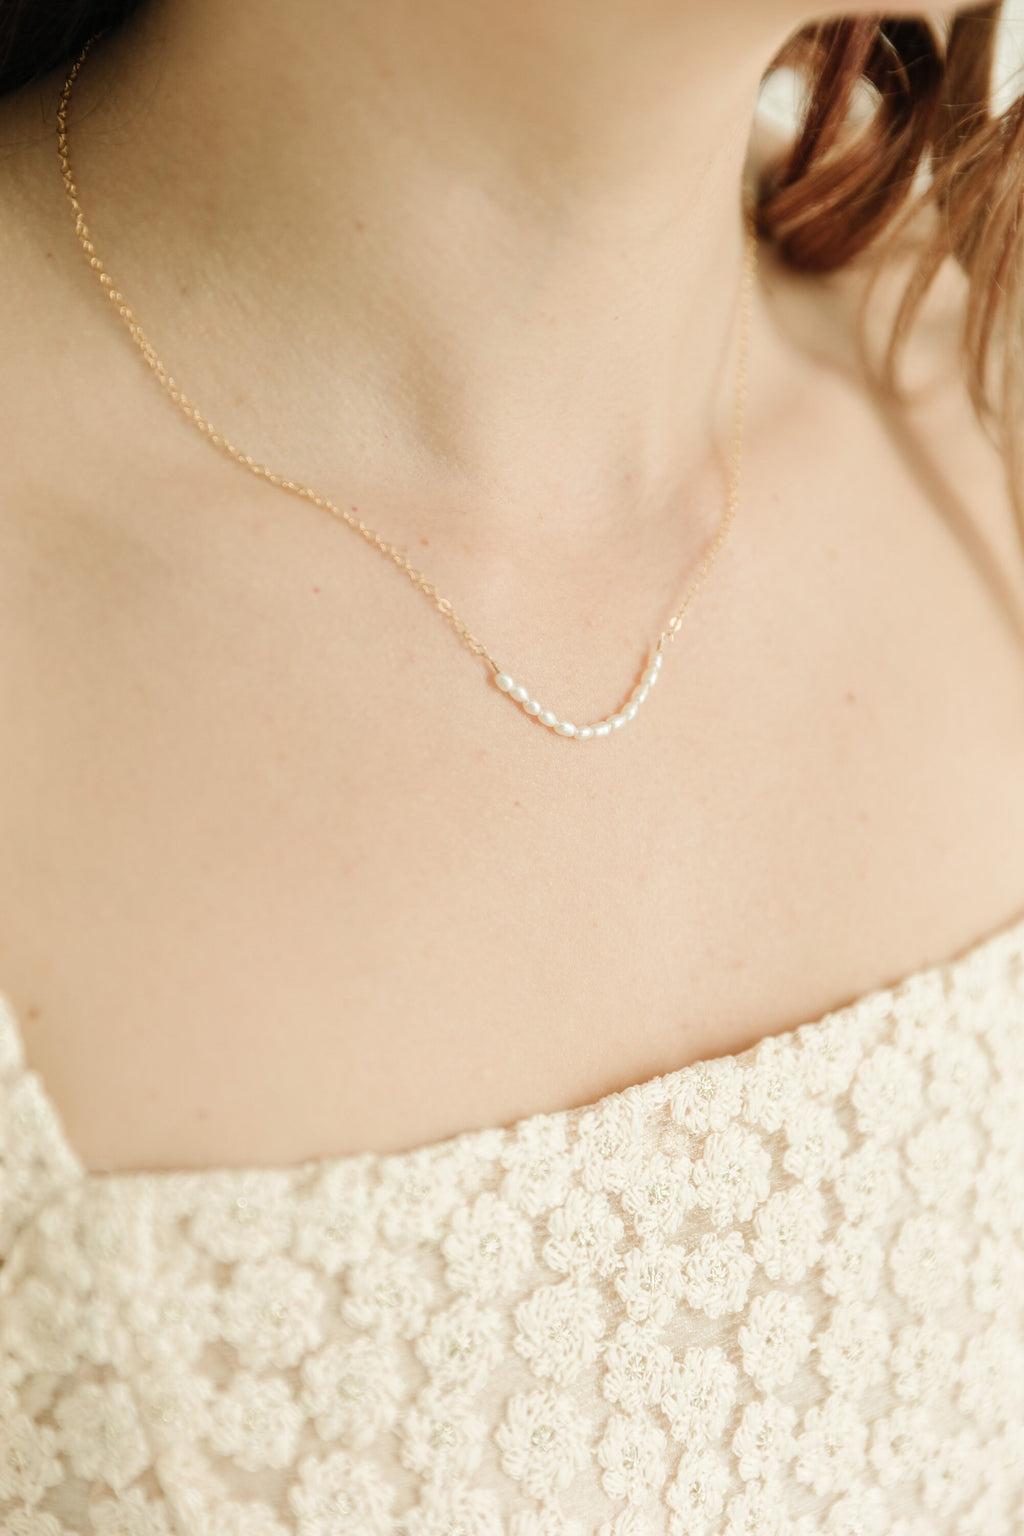 Dainty freshwater Pearl bar necklace minimalist 14k gold-fill sterling silver Necklace Seaflower Jewelry   